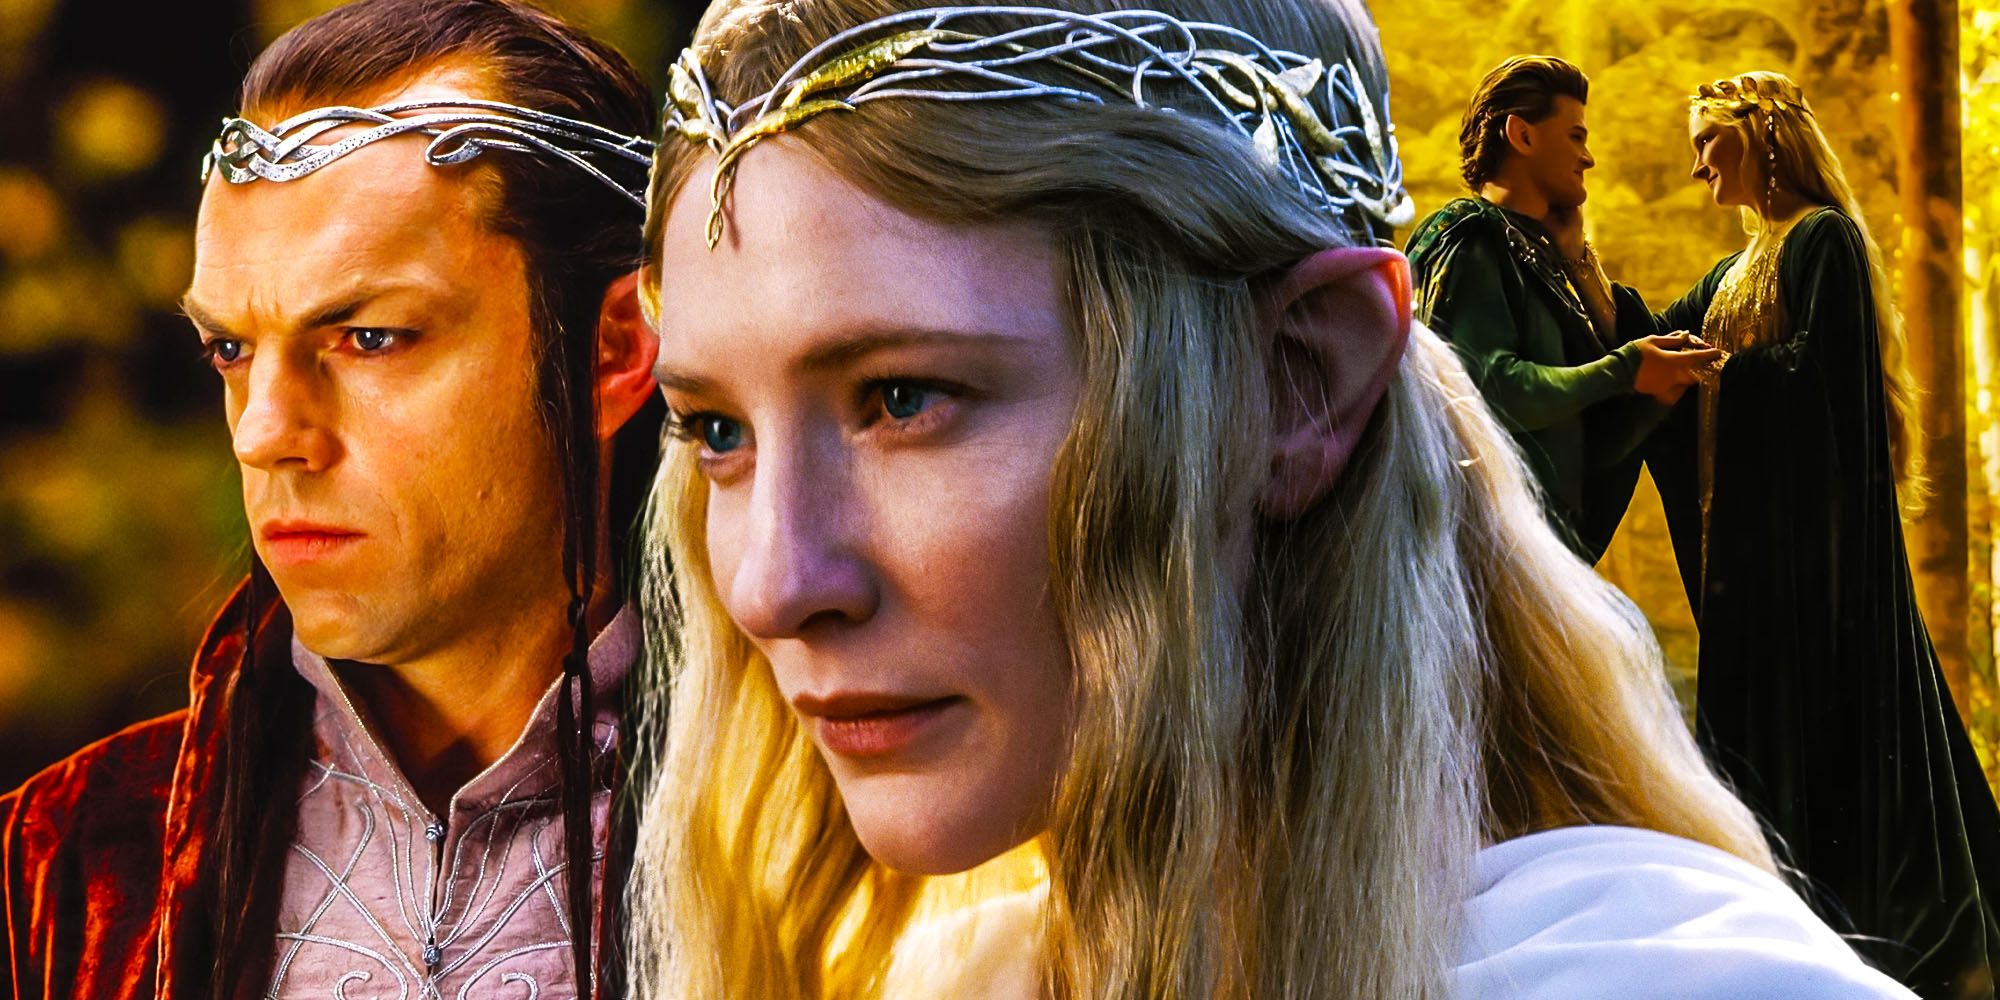 Lord of the rings Galadriel Elrond rings of power